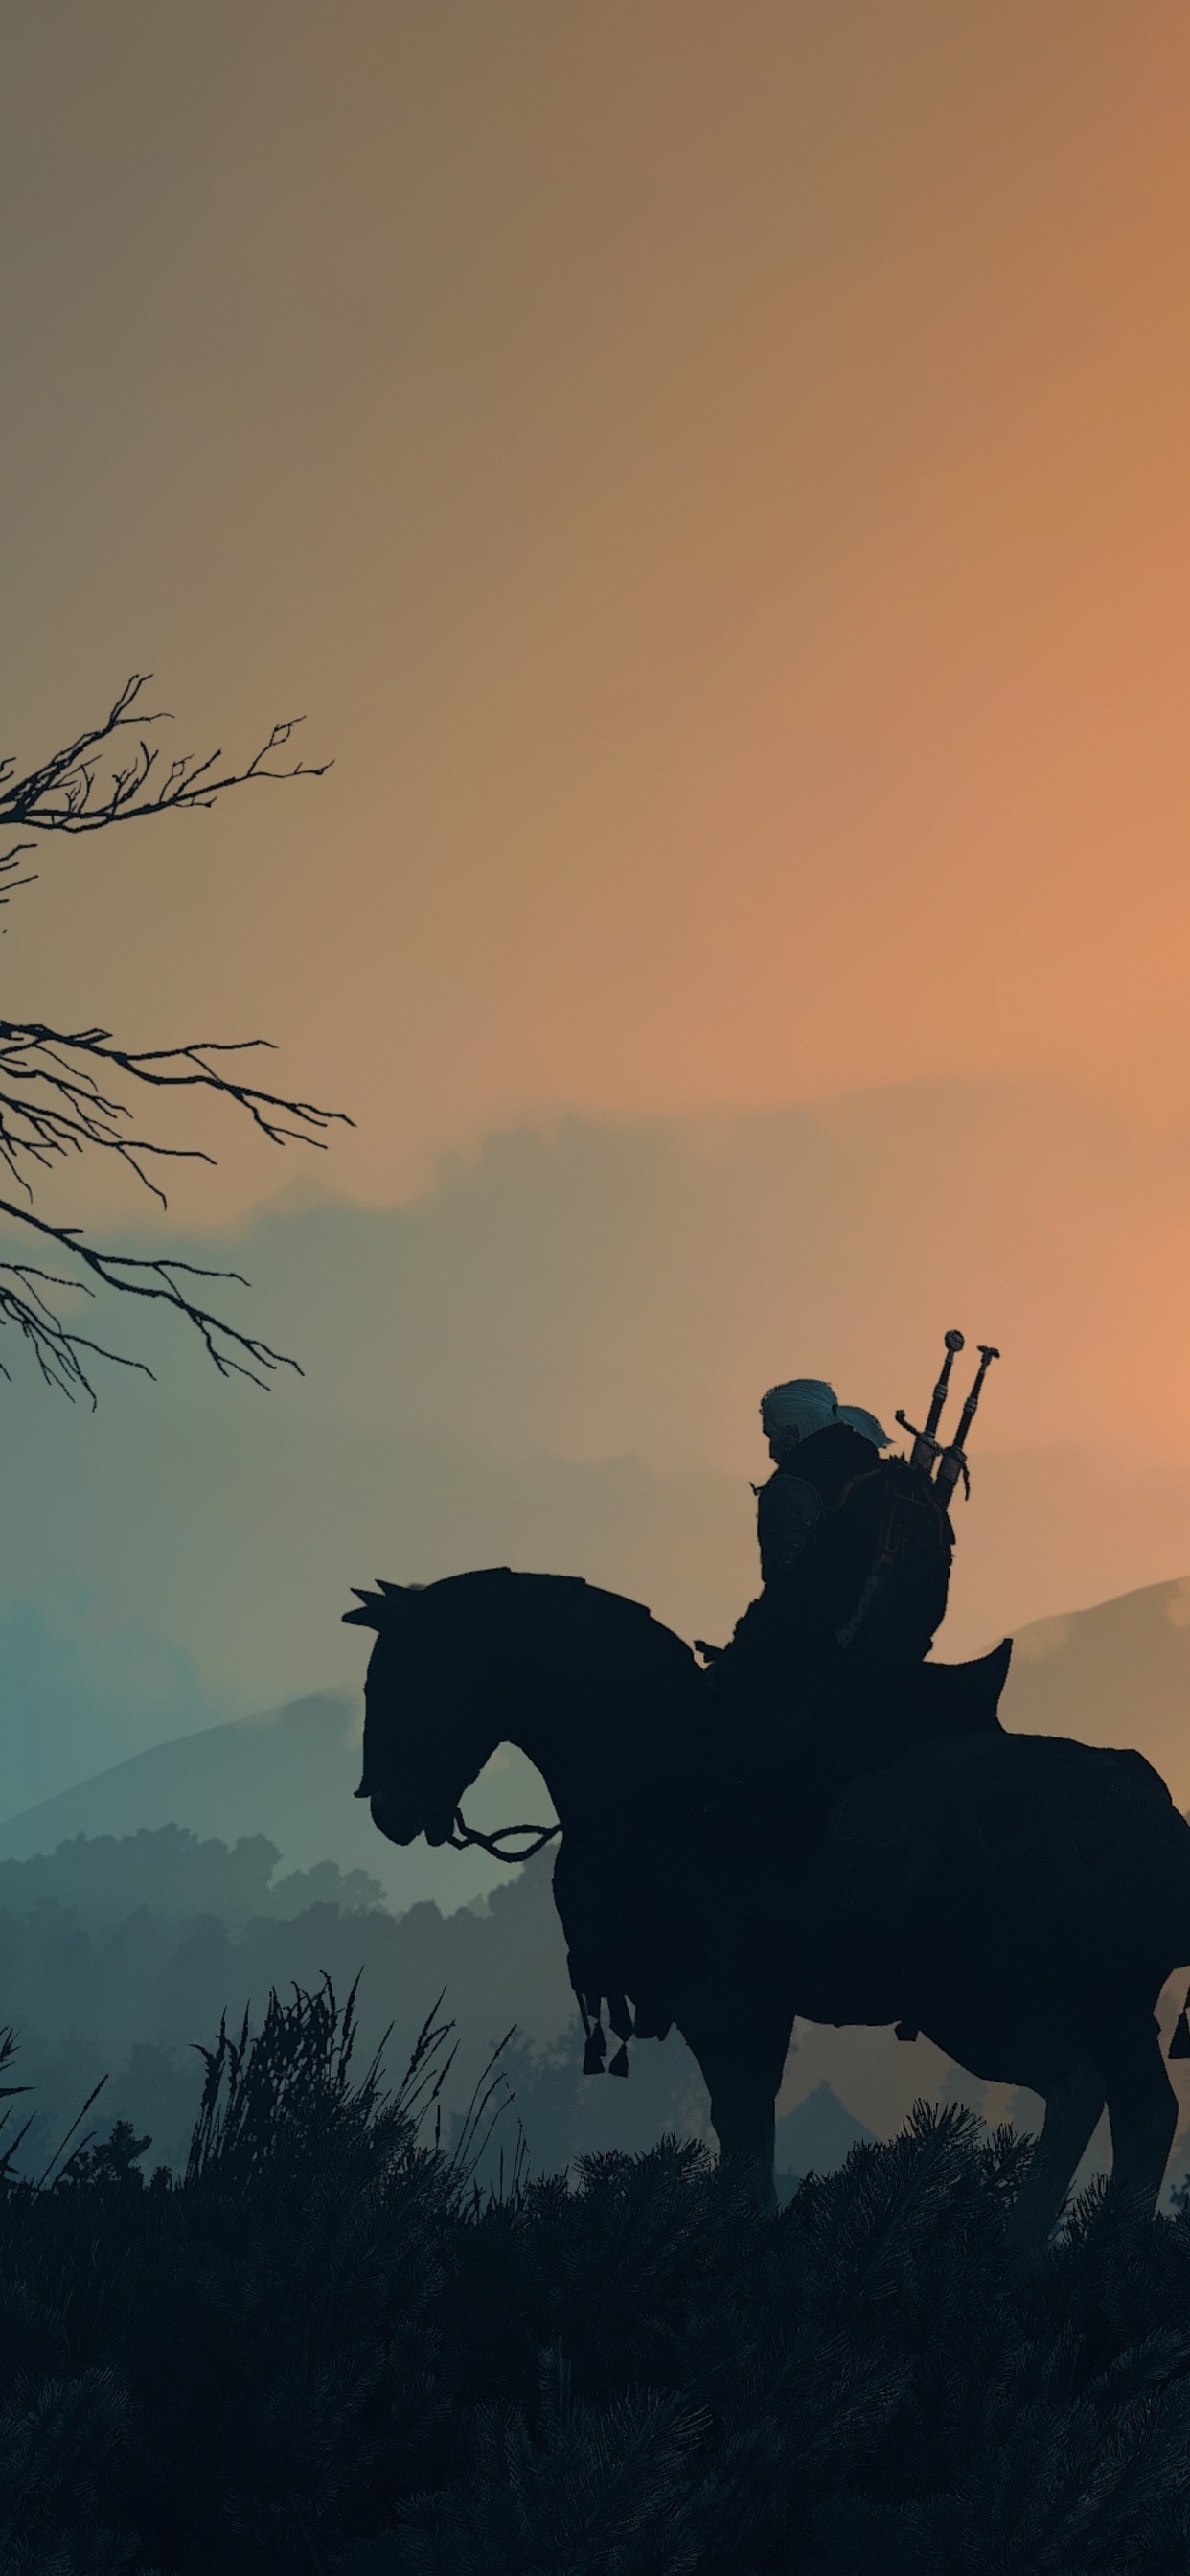 The Witcher 3 Wild Hunt Minimalism Logo Wallpapers